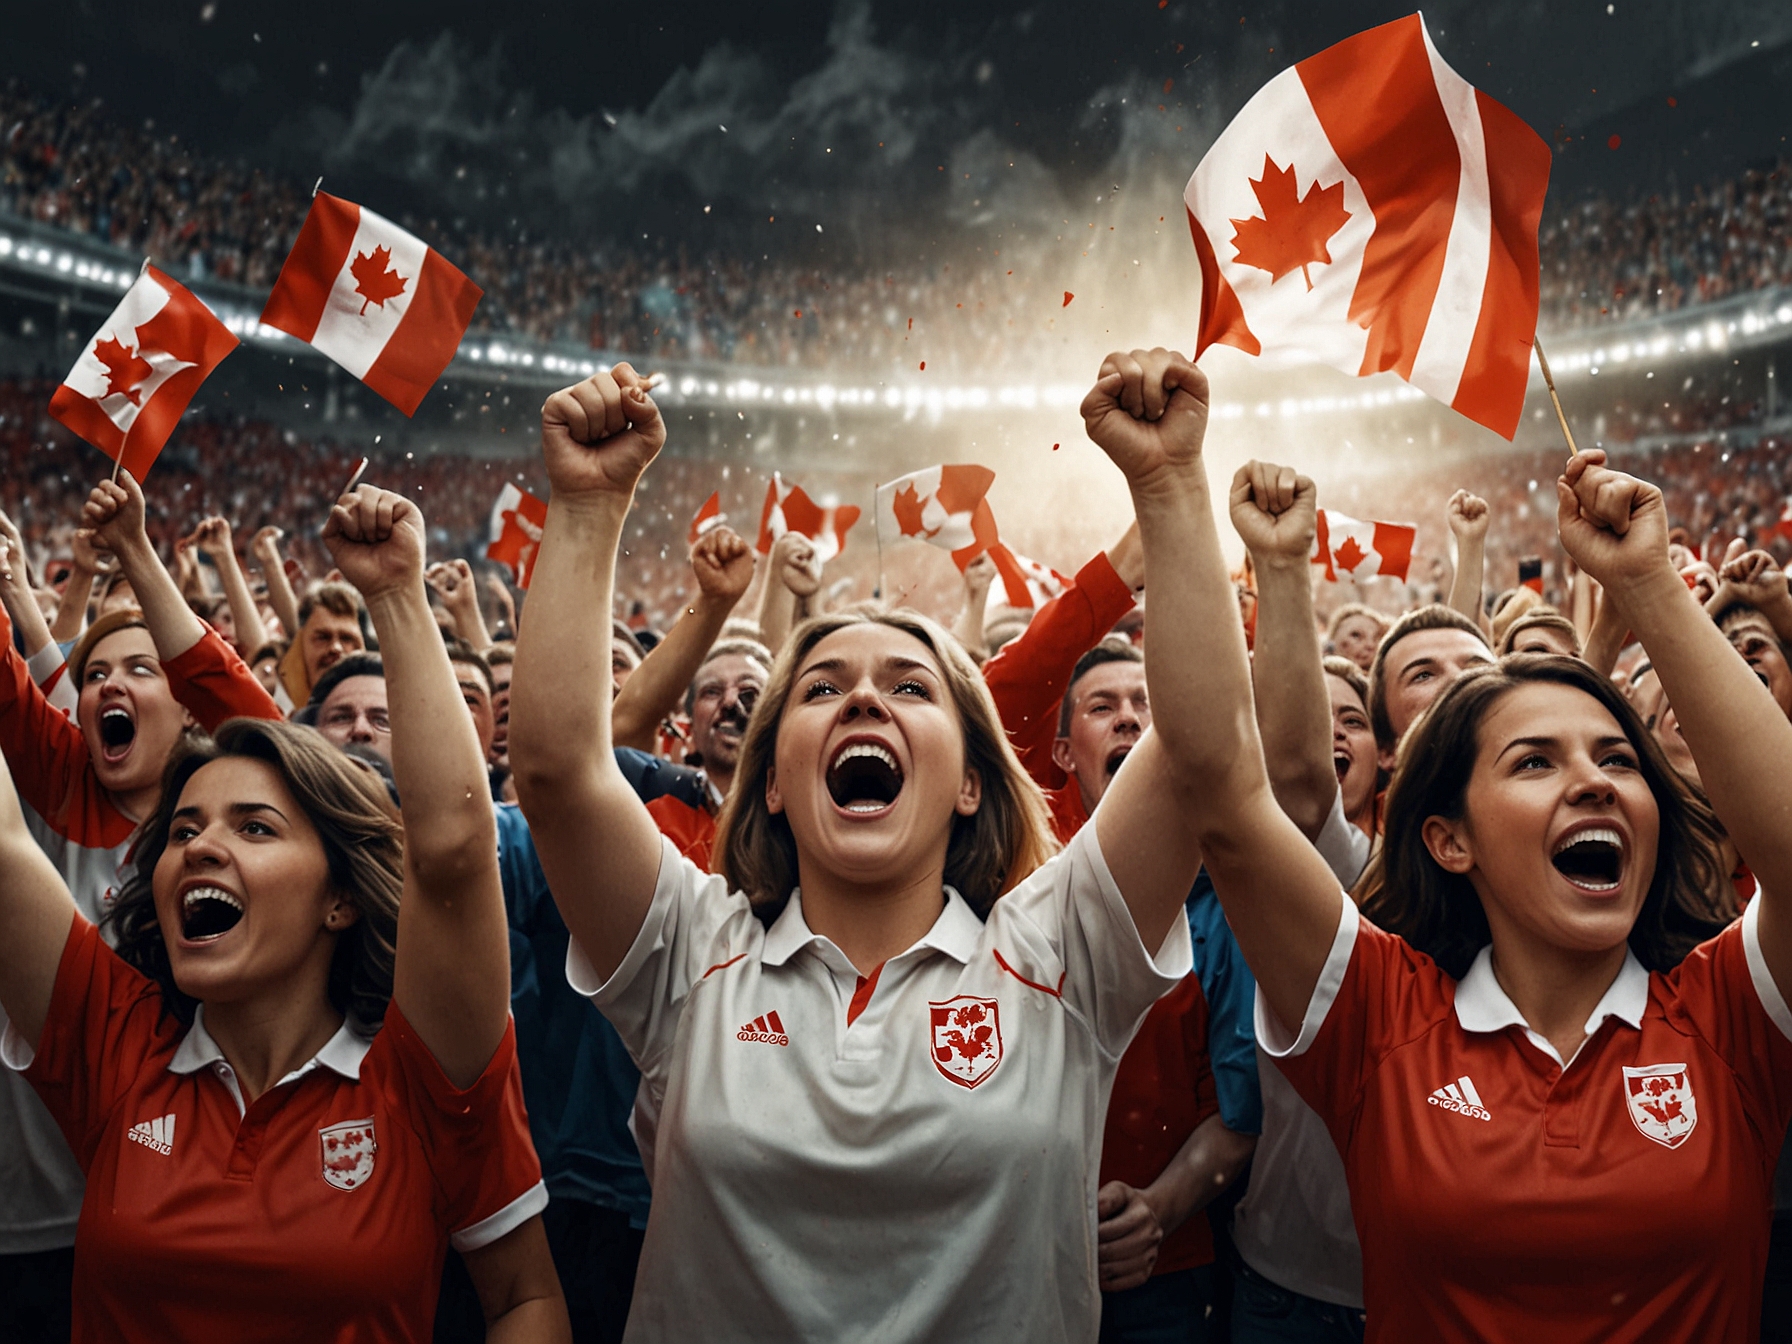 Energetic Canadian fans cheering their team during an international match, showcasing the nation's renewed hope and pride in their soccer squad.